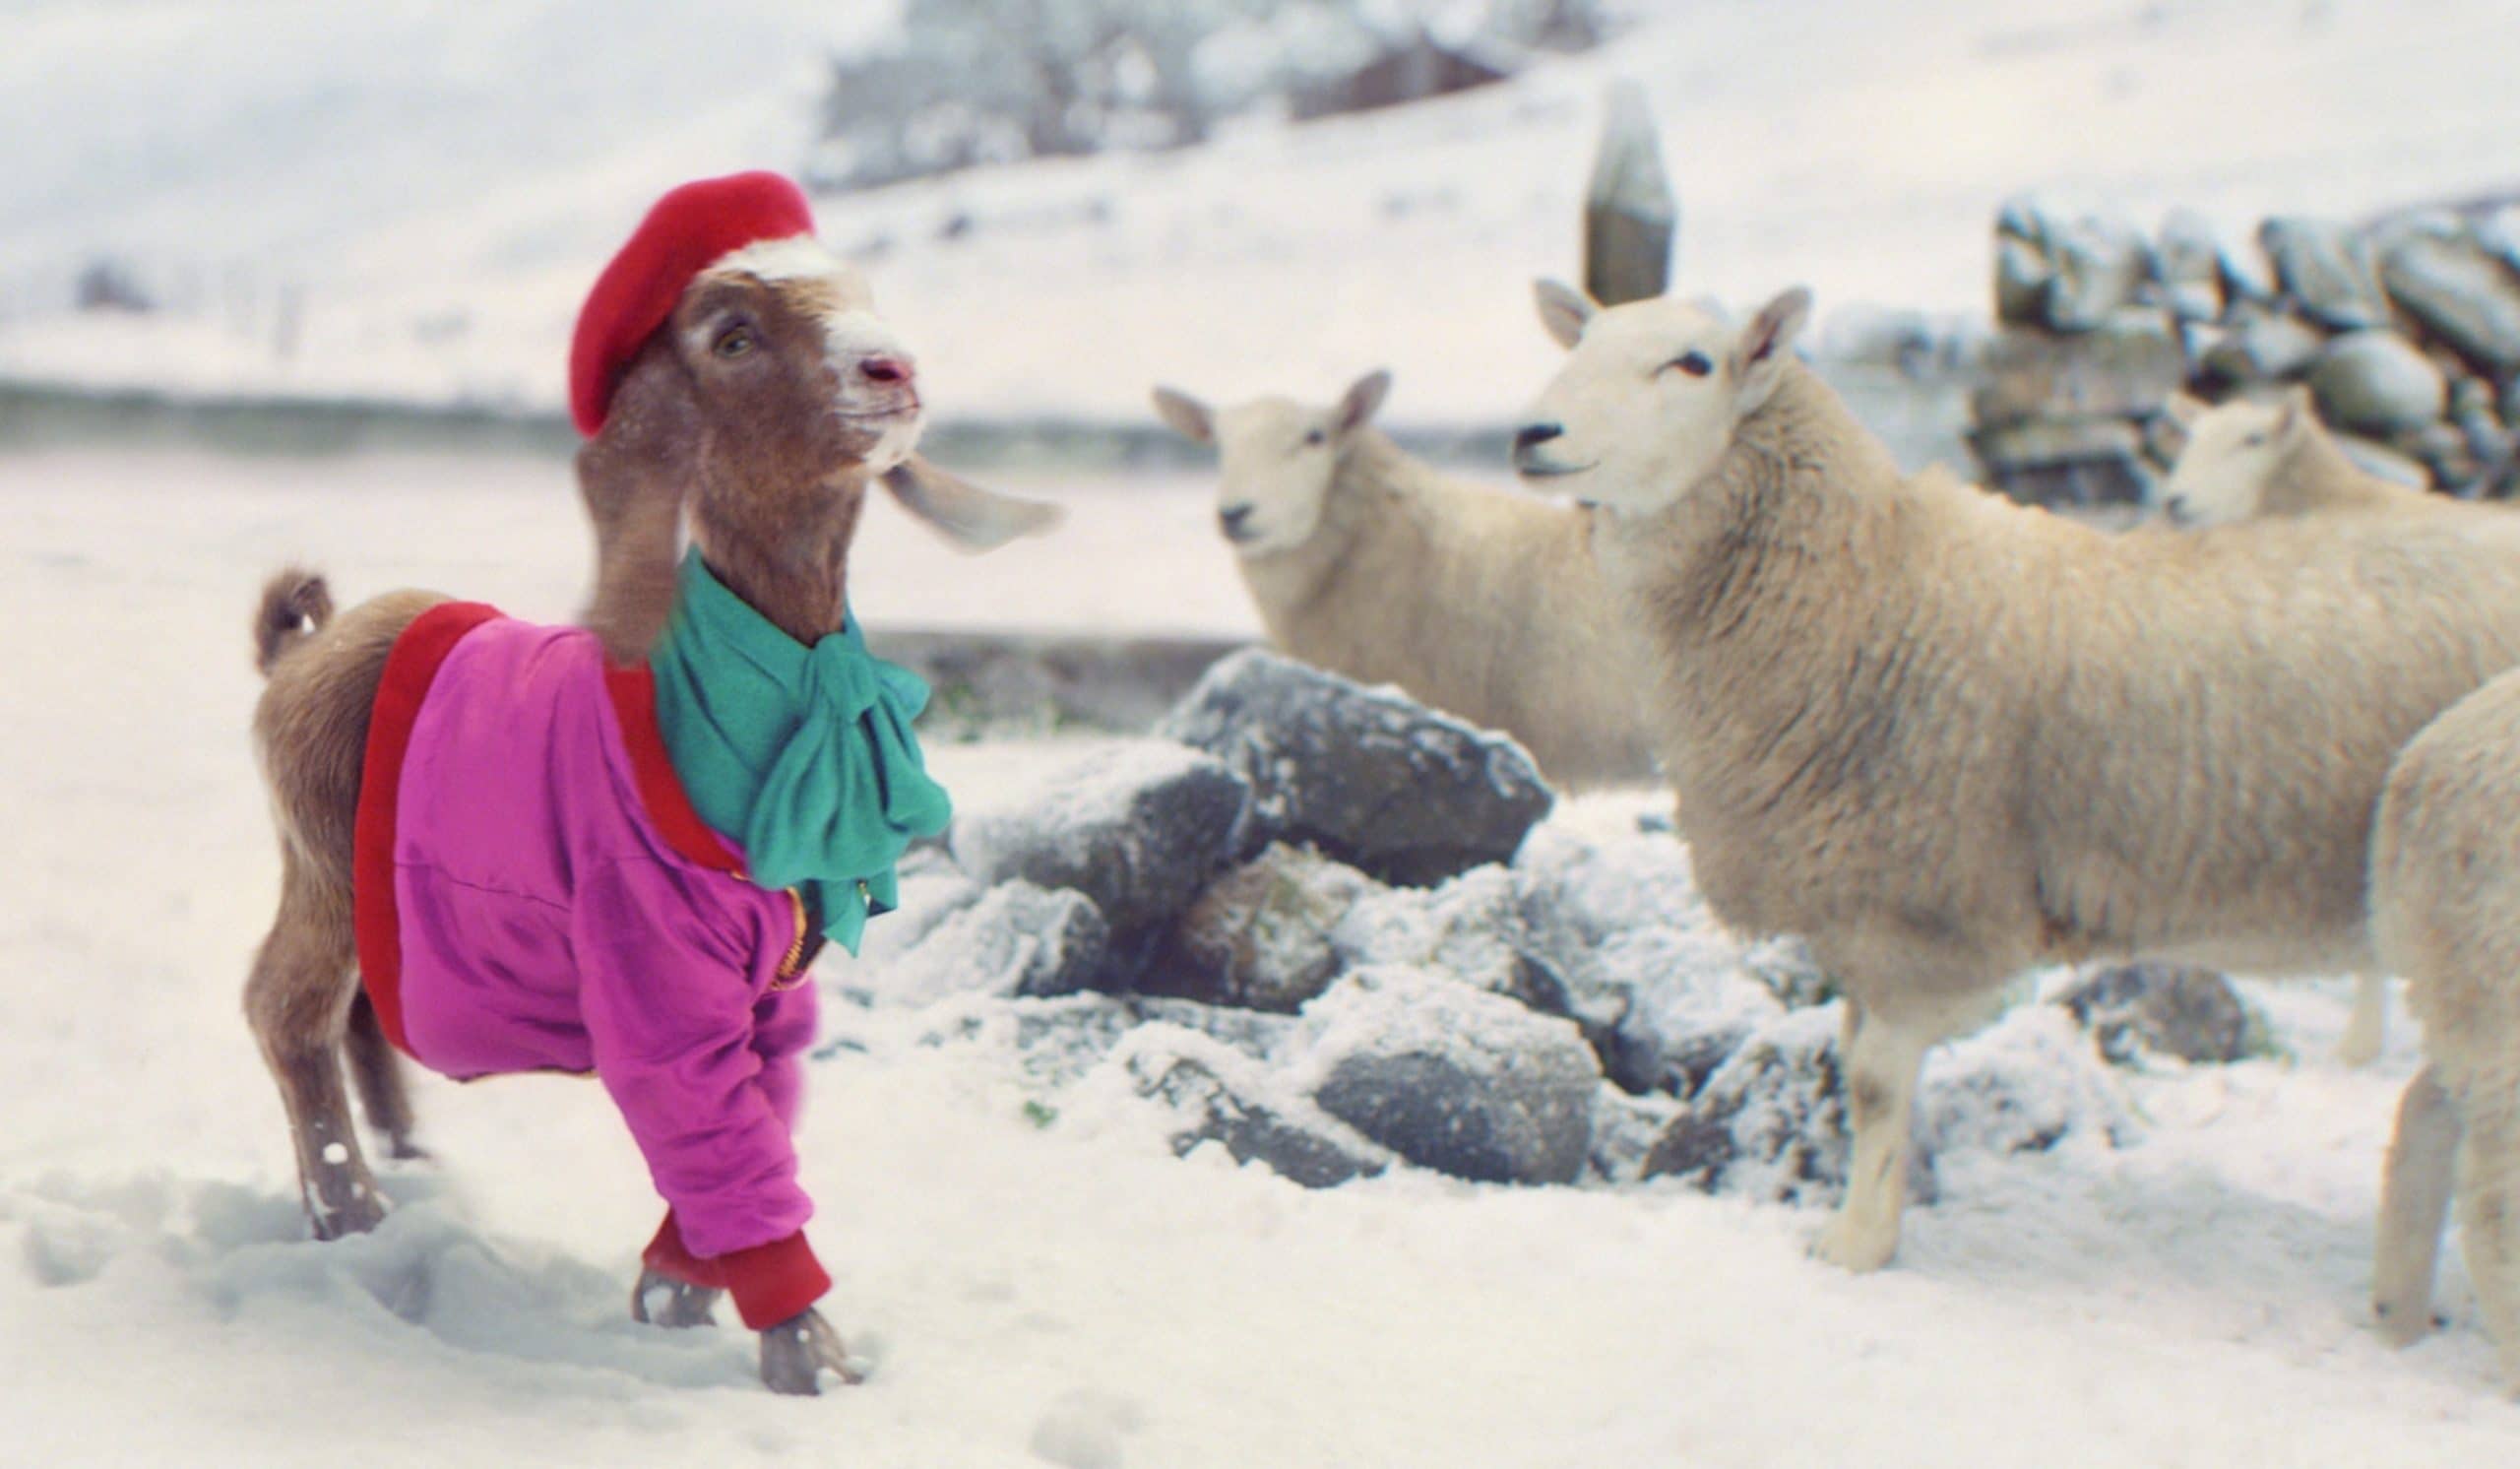 Goat wearing scarf and hat walking past sheep